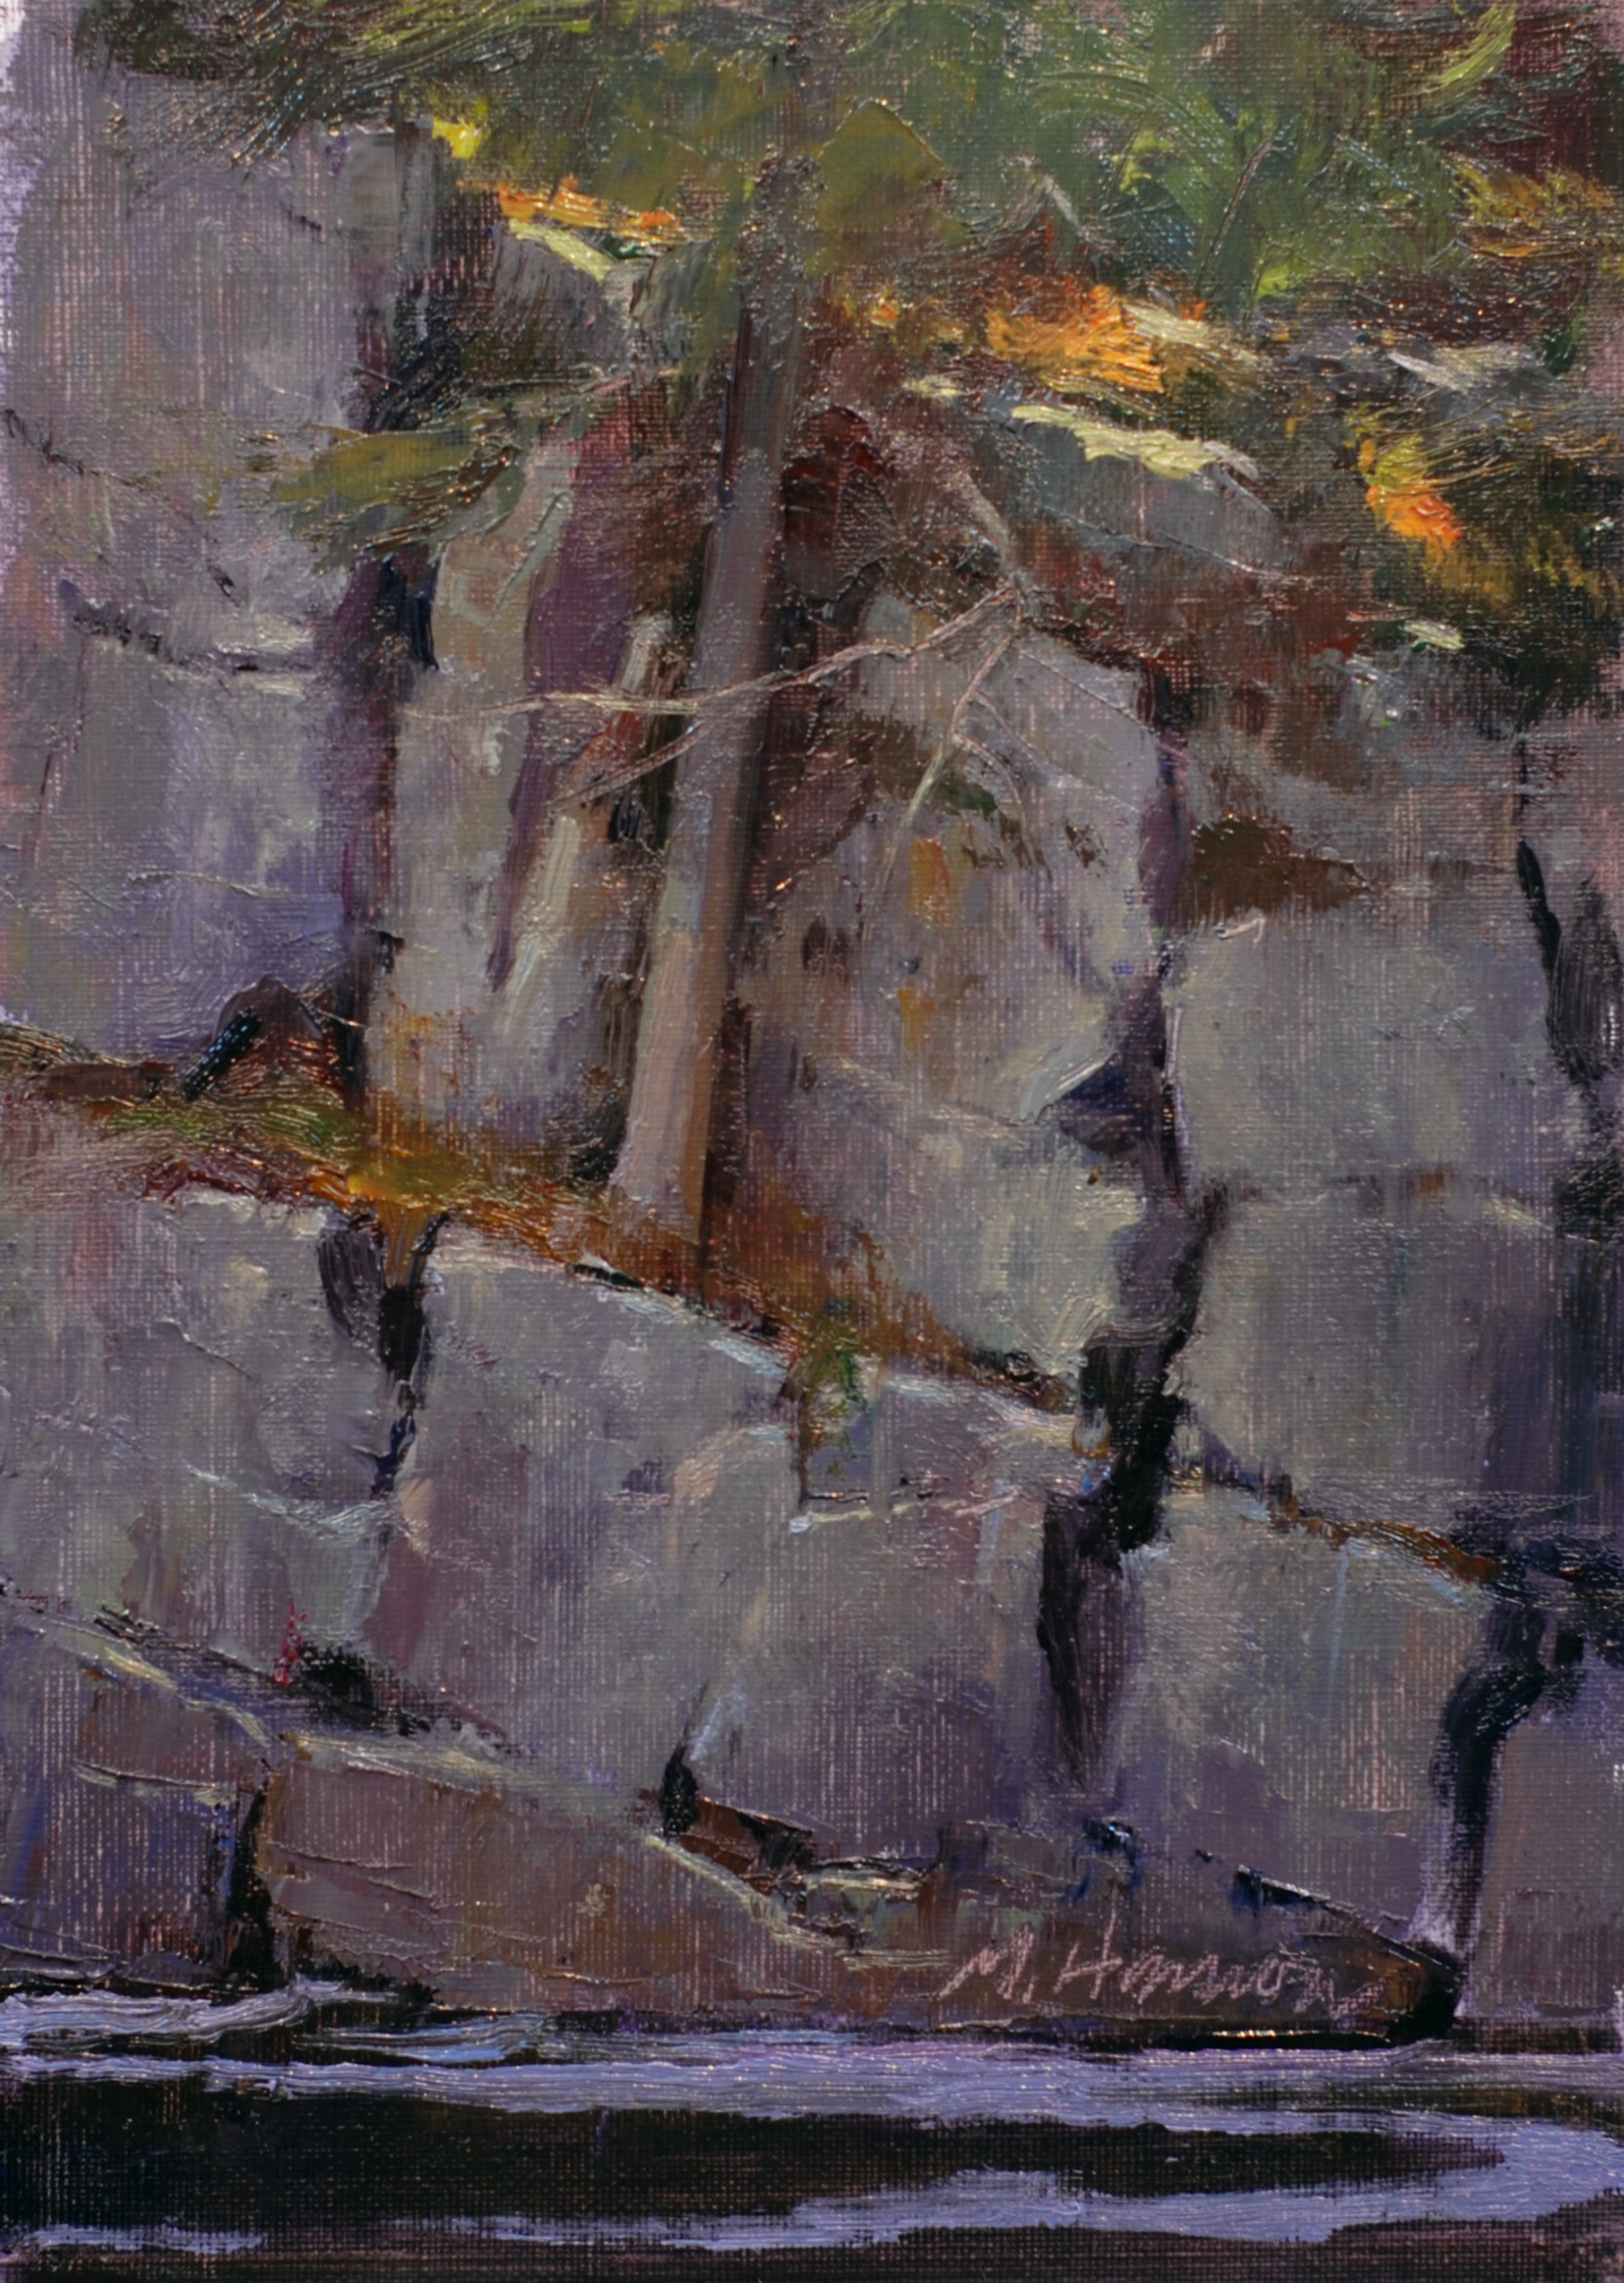 Marc Hanson, "Cliff Hugger," 7 x 5 inches, Oil on Museum board